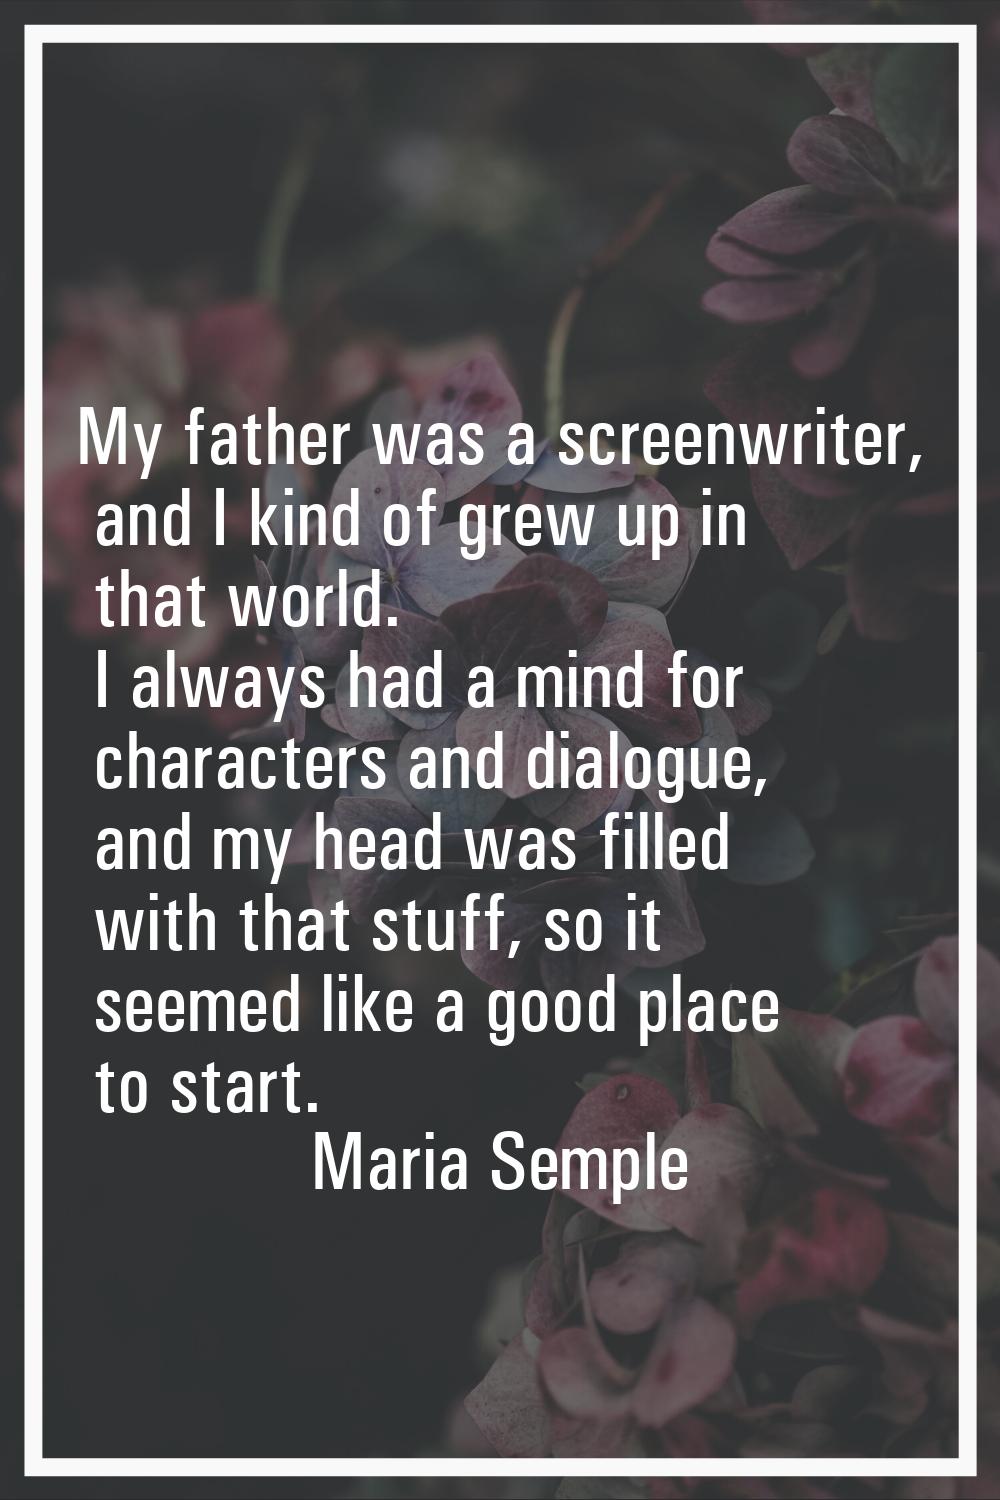 My father was a screenwriter, and I kind of grew up in that world. I always had a mind for characte